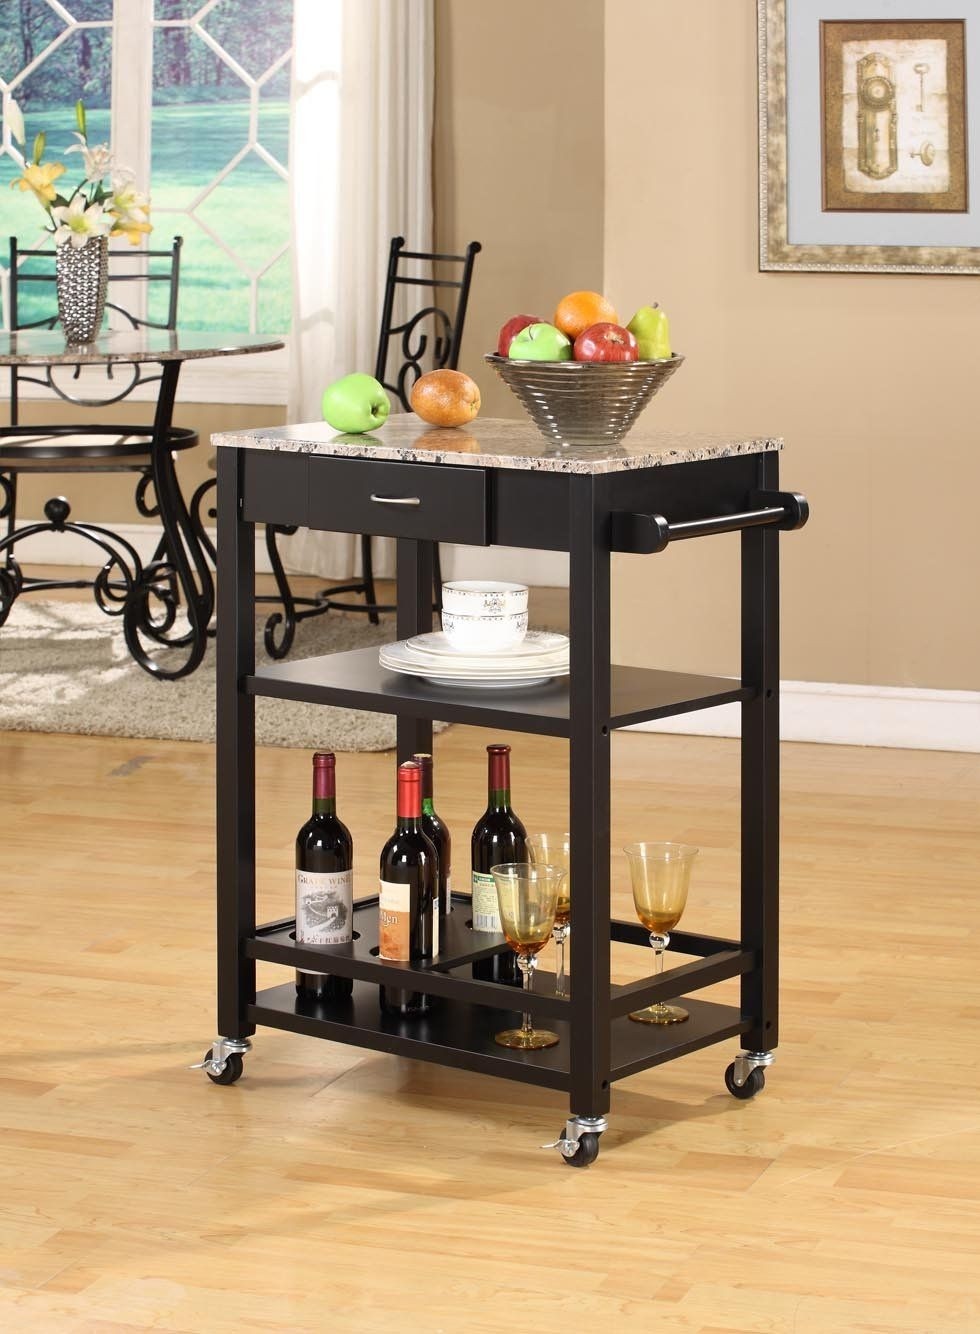 King's Brand K02 Faux Marble with Wood Kitchen Buffet Serving Cart, Black Finish